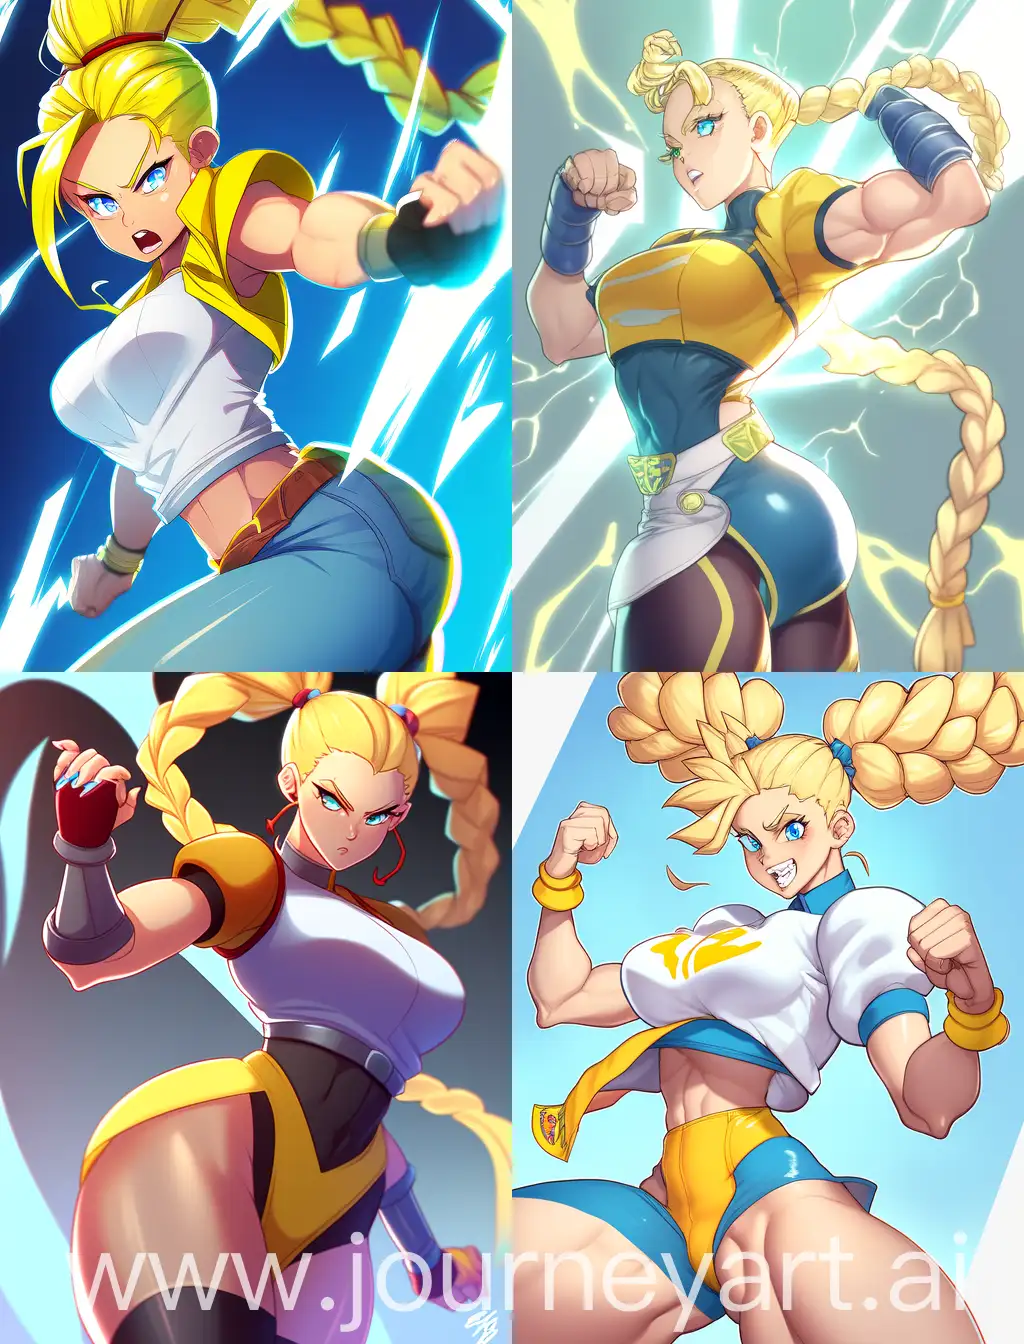 Pumped-up woman with yellow hair, hair braided in a high ponytail, blue eyes, white skin, big pelvis